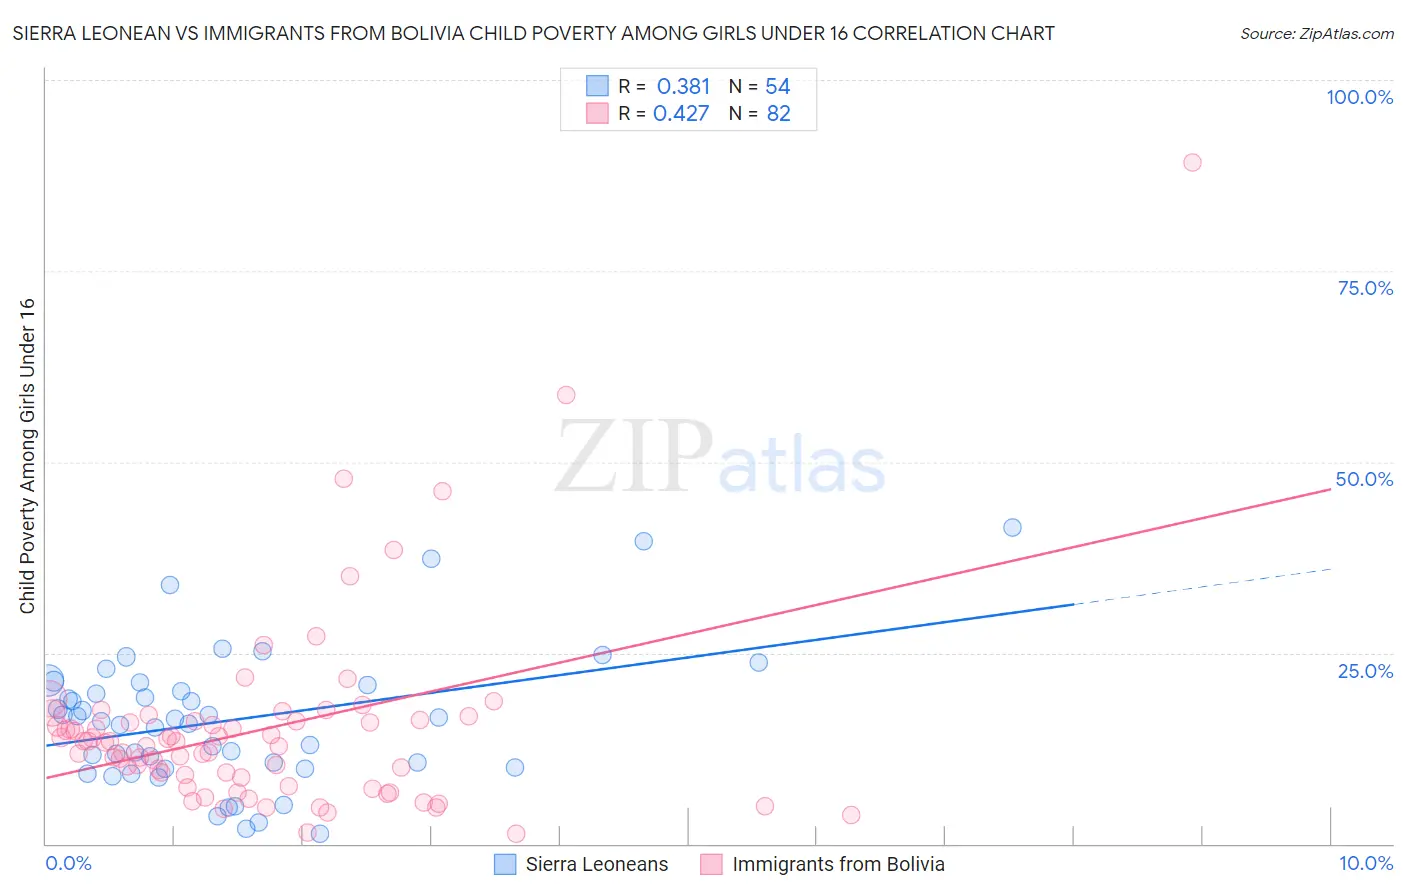 Sierra Leonean vs Immigrants from Bolivia Child Poverty Among Girls Under 16